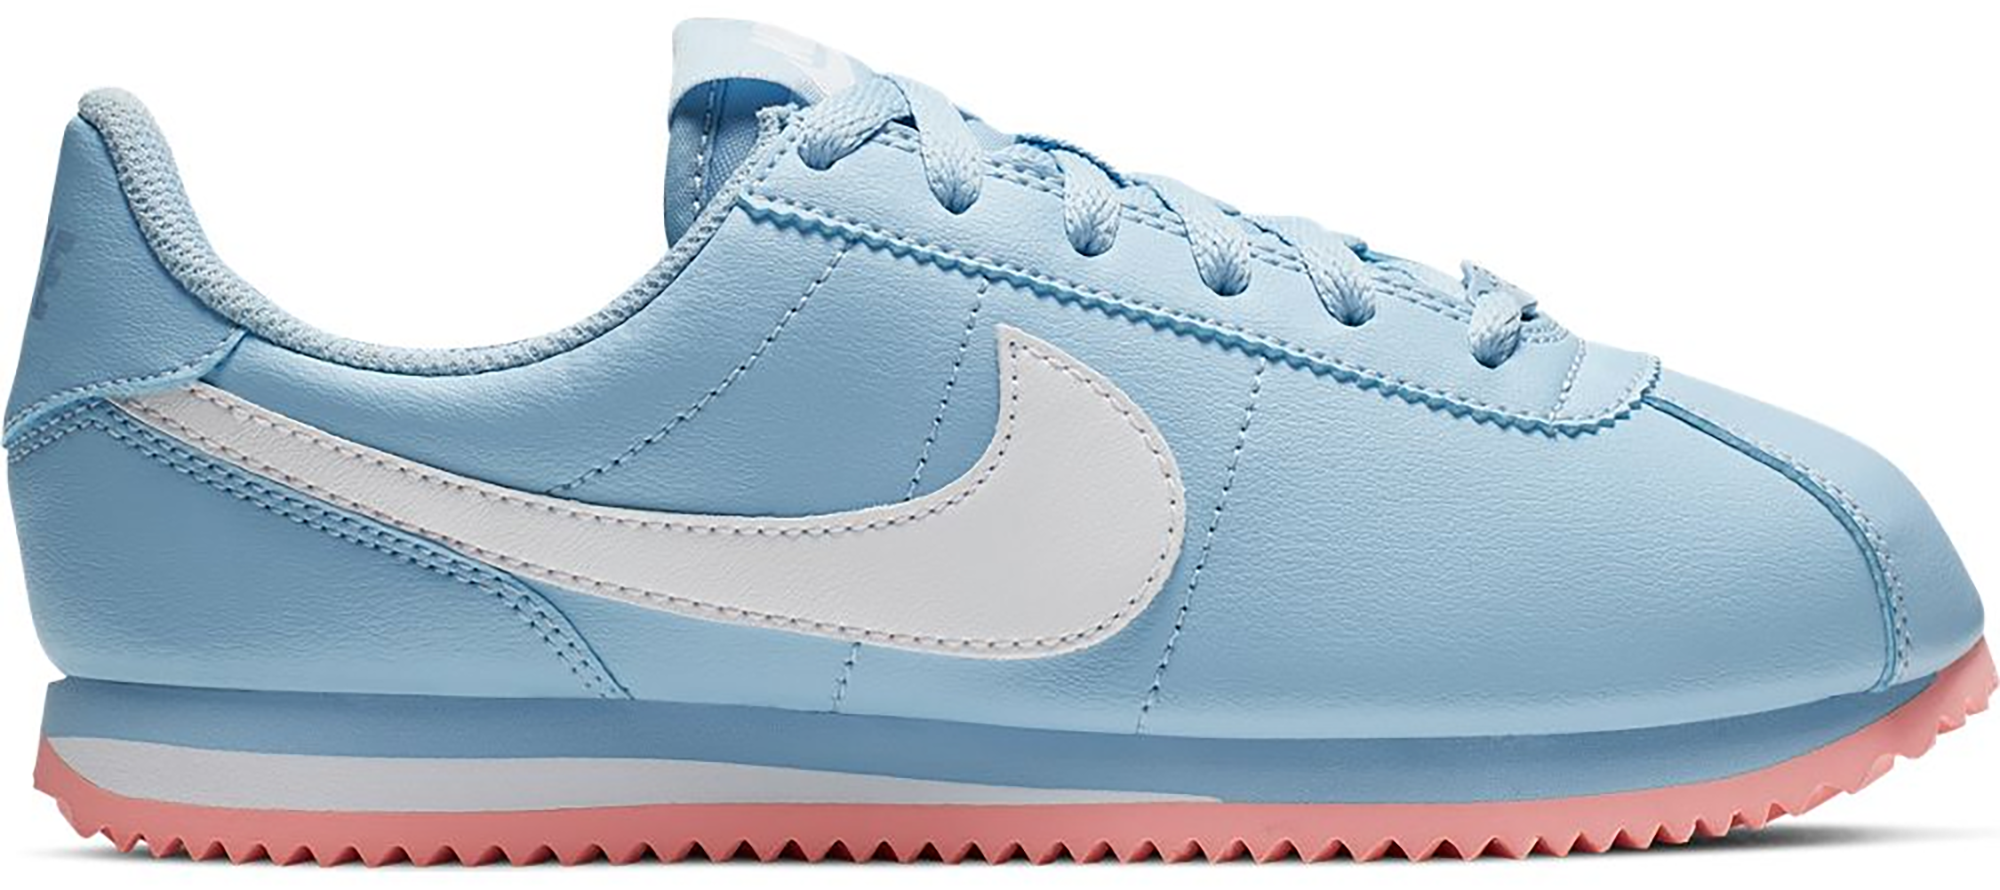 blue and white nike cortez